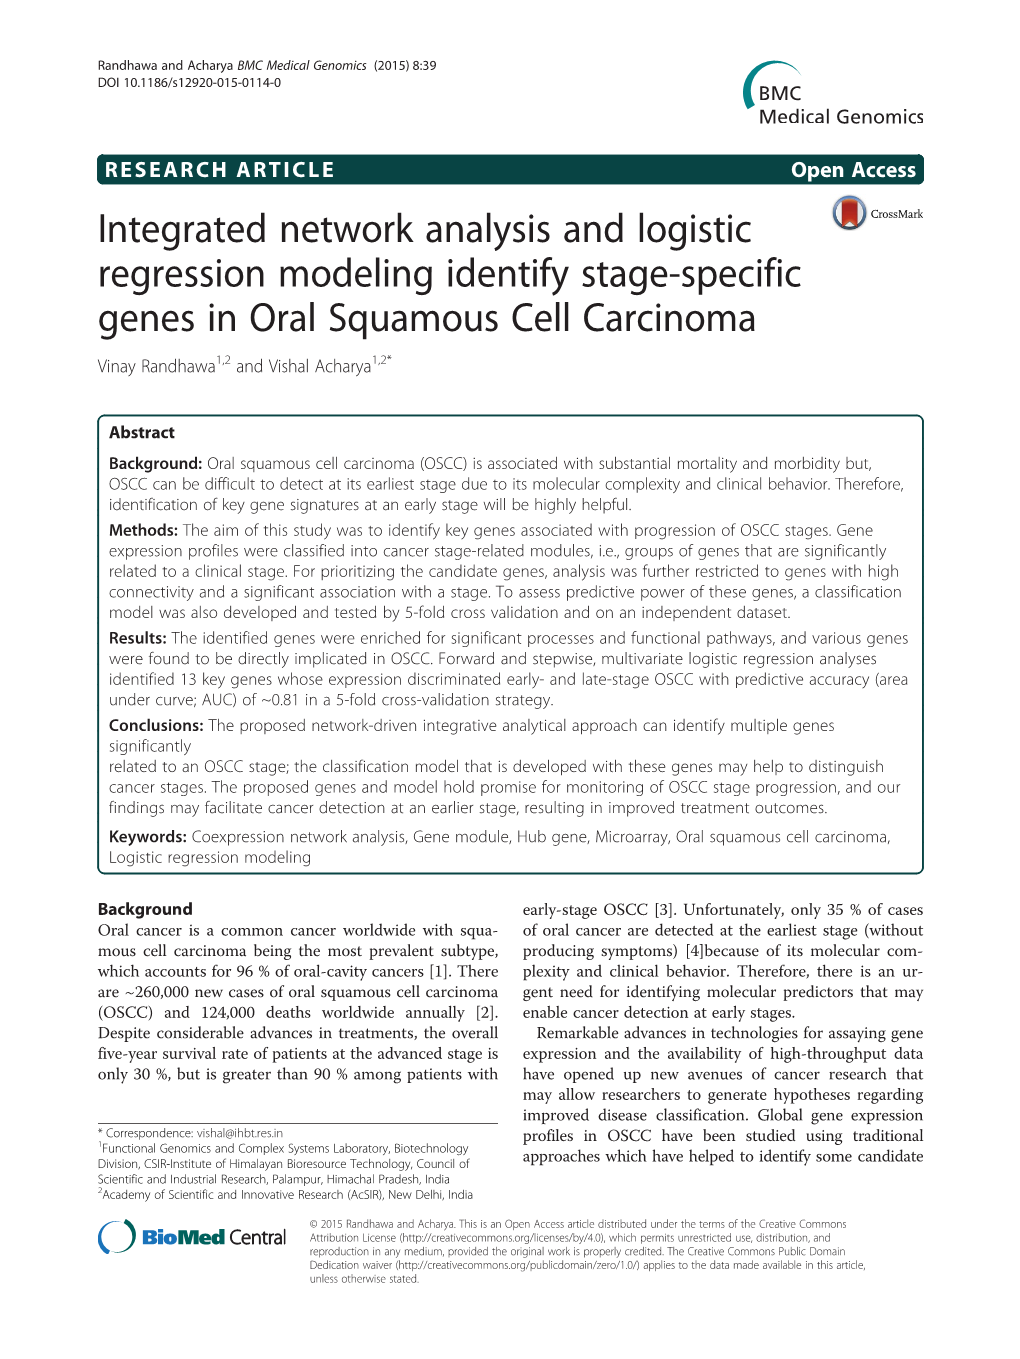 Integrated Network Analysis and Logistic Regression Modeling Identify Stage-Specific Genes in Oral Squamous Cell Carcinoma Vinay Randhawa1,2 and Vishal Acharya1,2*